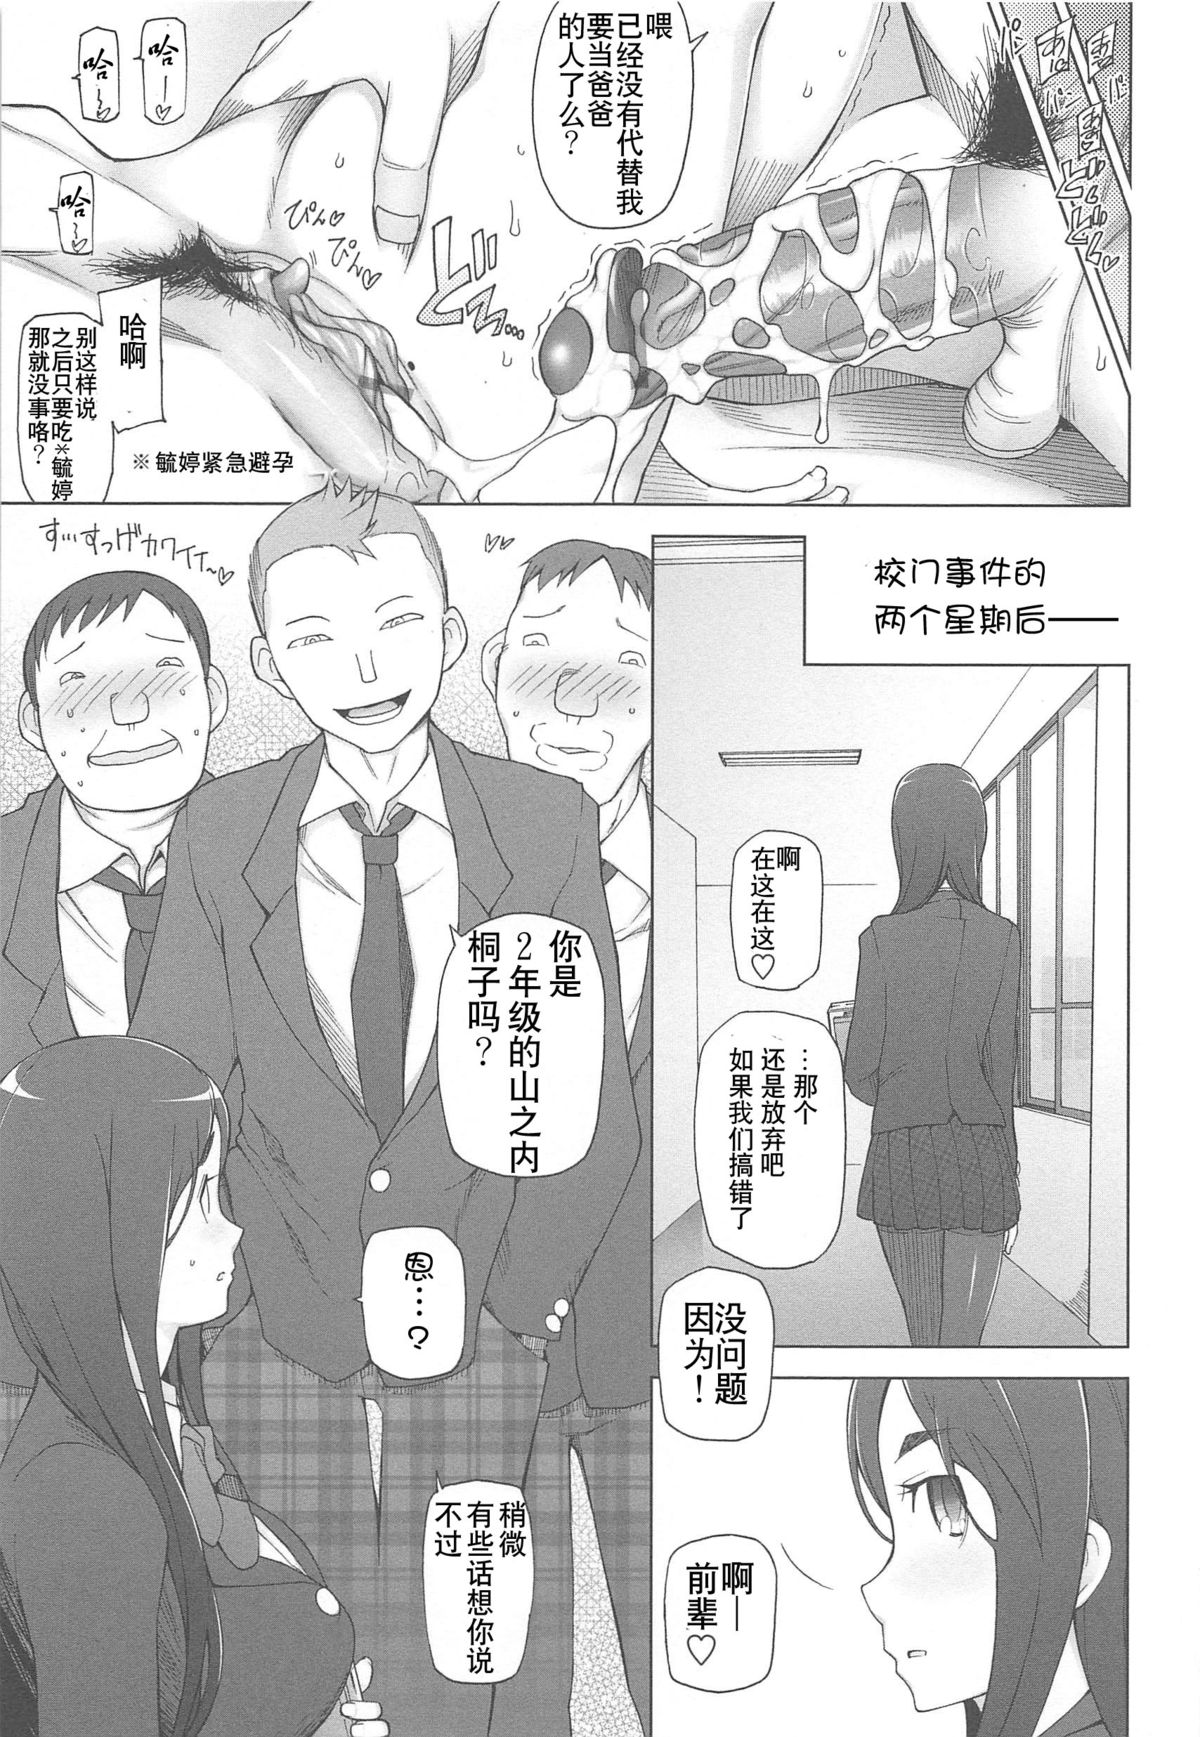 [Miito Shido] LUSTFUL BERRY Ch. 4 [Chinese] [joungpig个人汉化] page 7 full